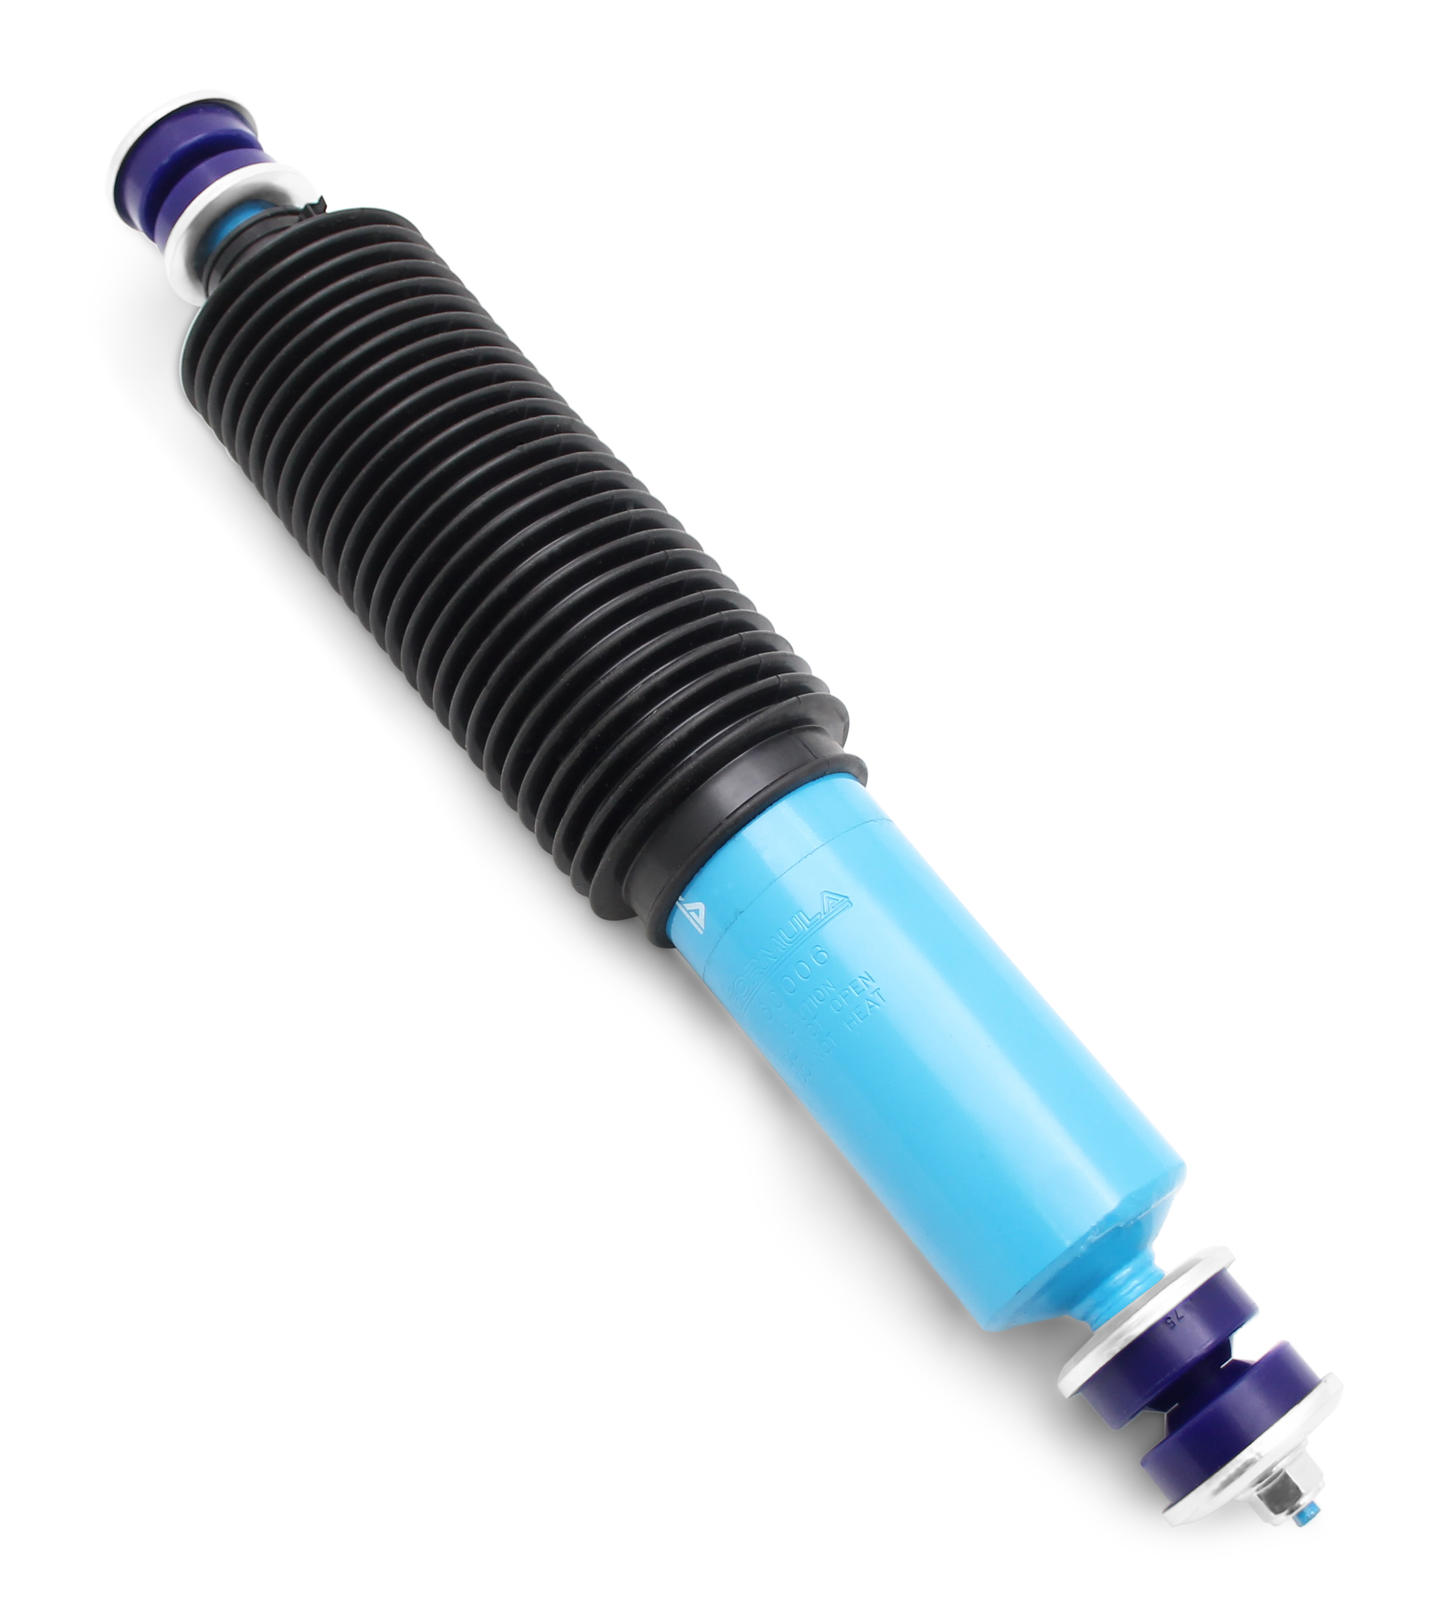 Front Formula 4x4 Big Bore Shock Absorber to suit Toyota Landcruiser 76, 78 & 79 Series